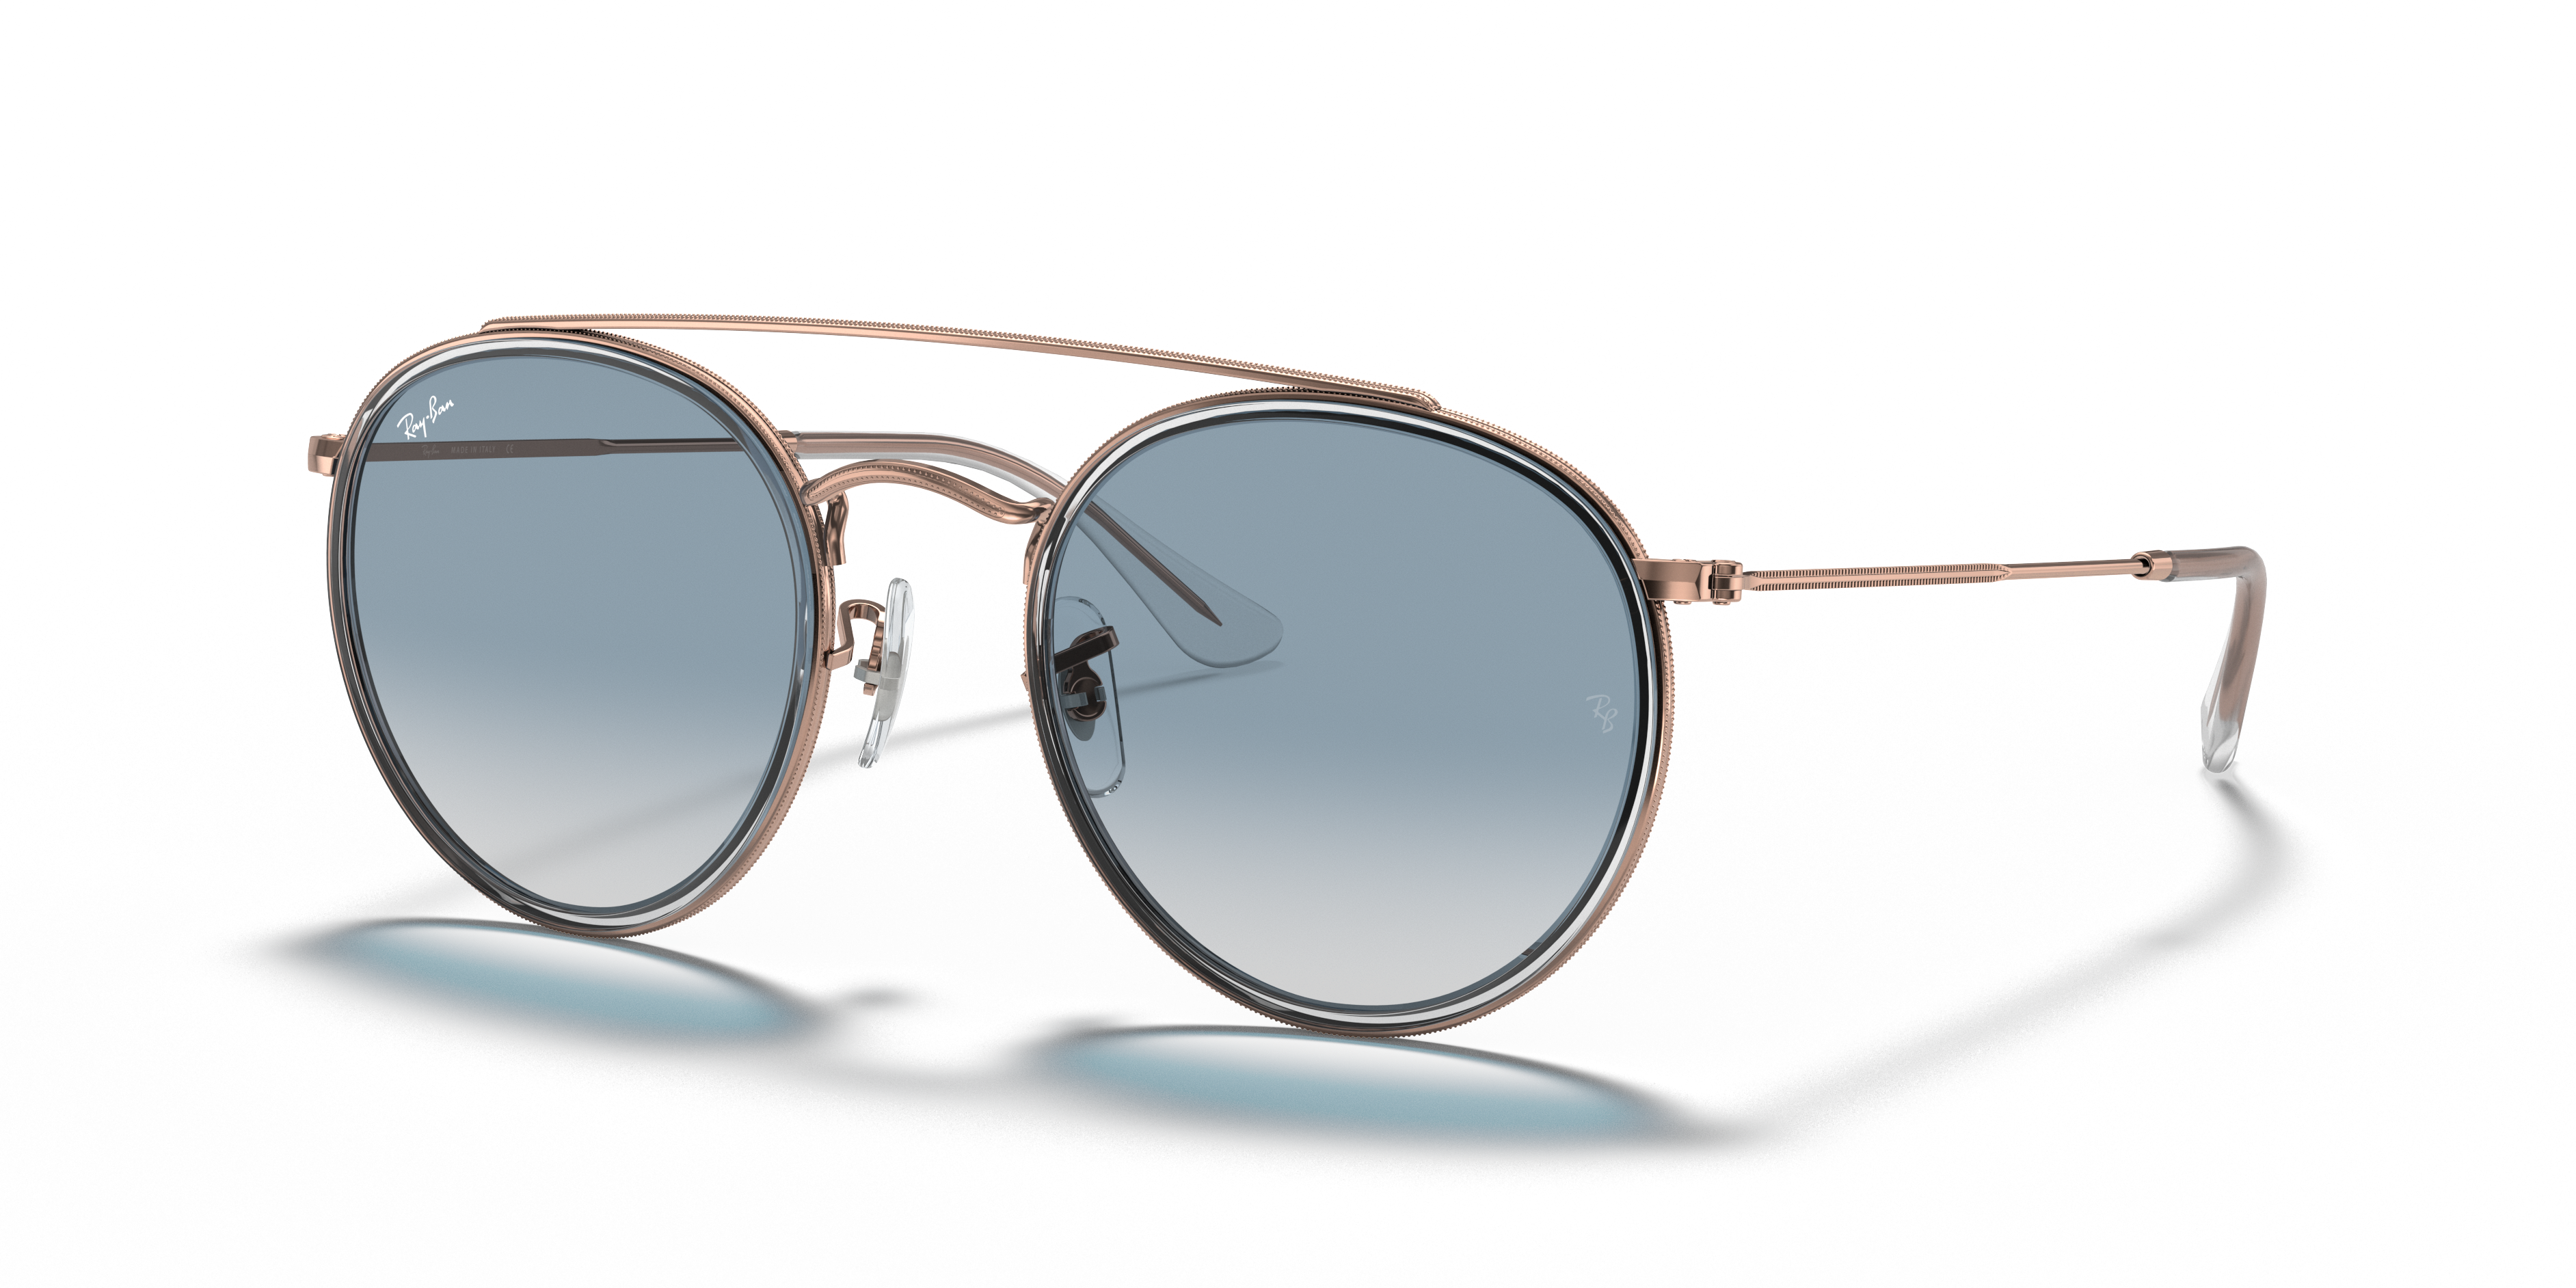 ROUND DOUBLE BRIDGE Sunglasses in Copper and Light Blue - RB3647N